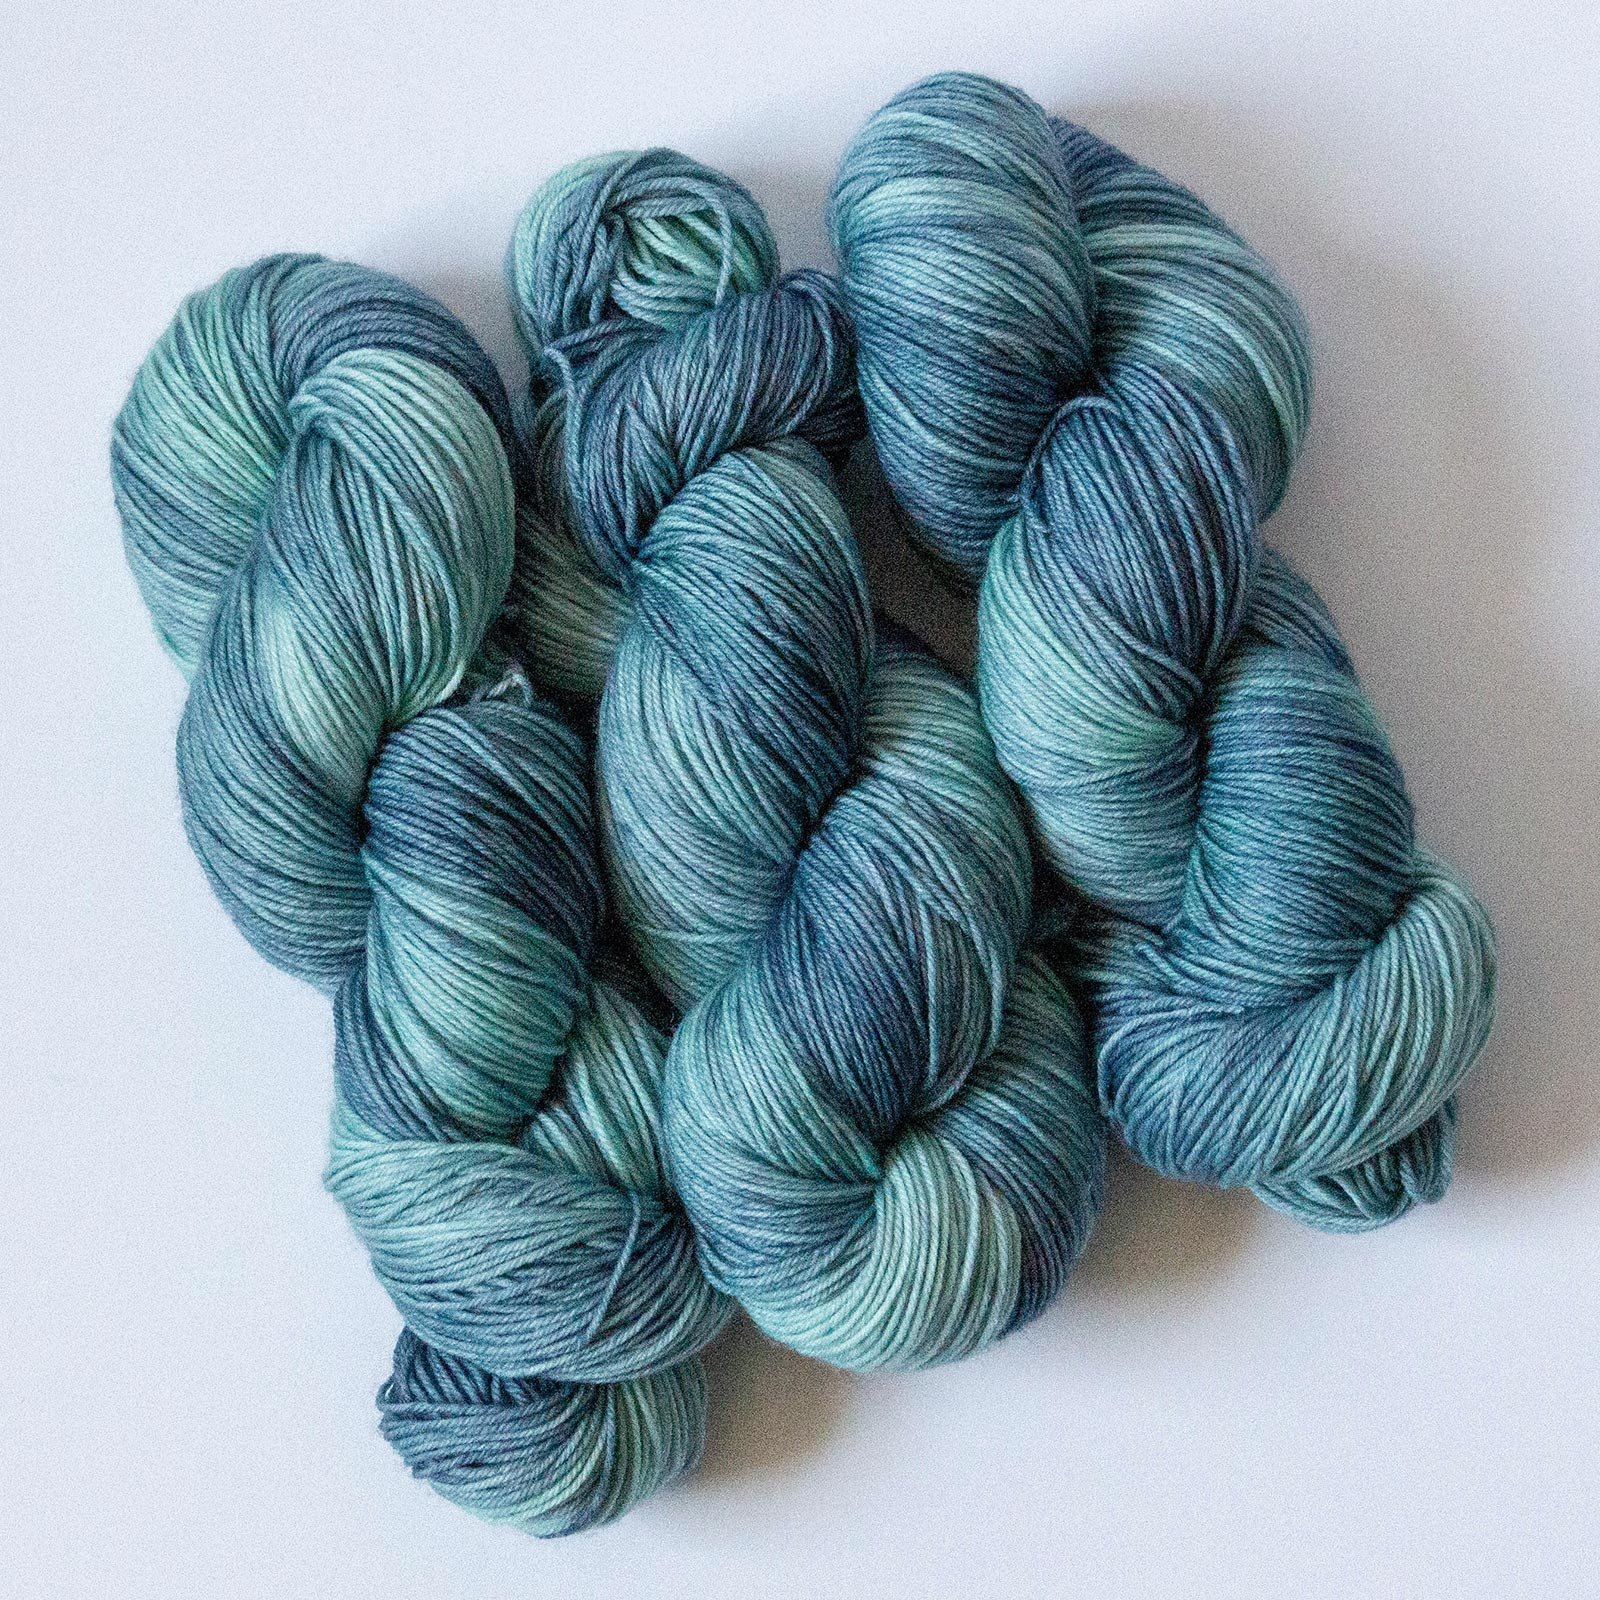 Image of Surf's Up Sock Yarn in Blue Green -- Hand Dyed Extrafine Merino Wool Blend